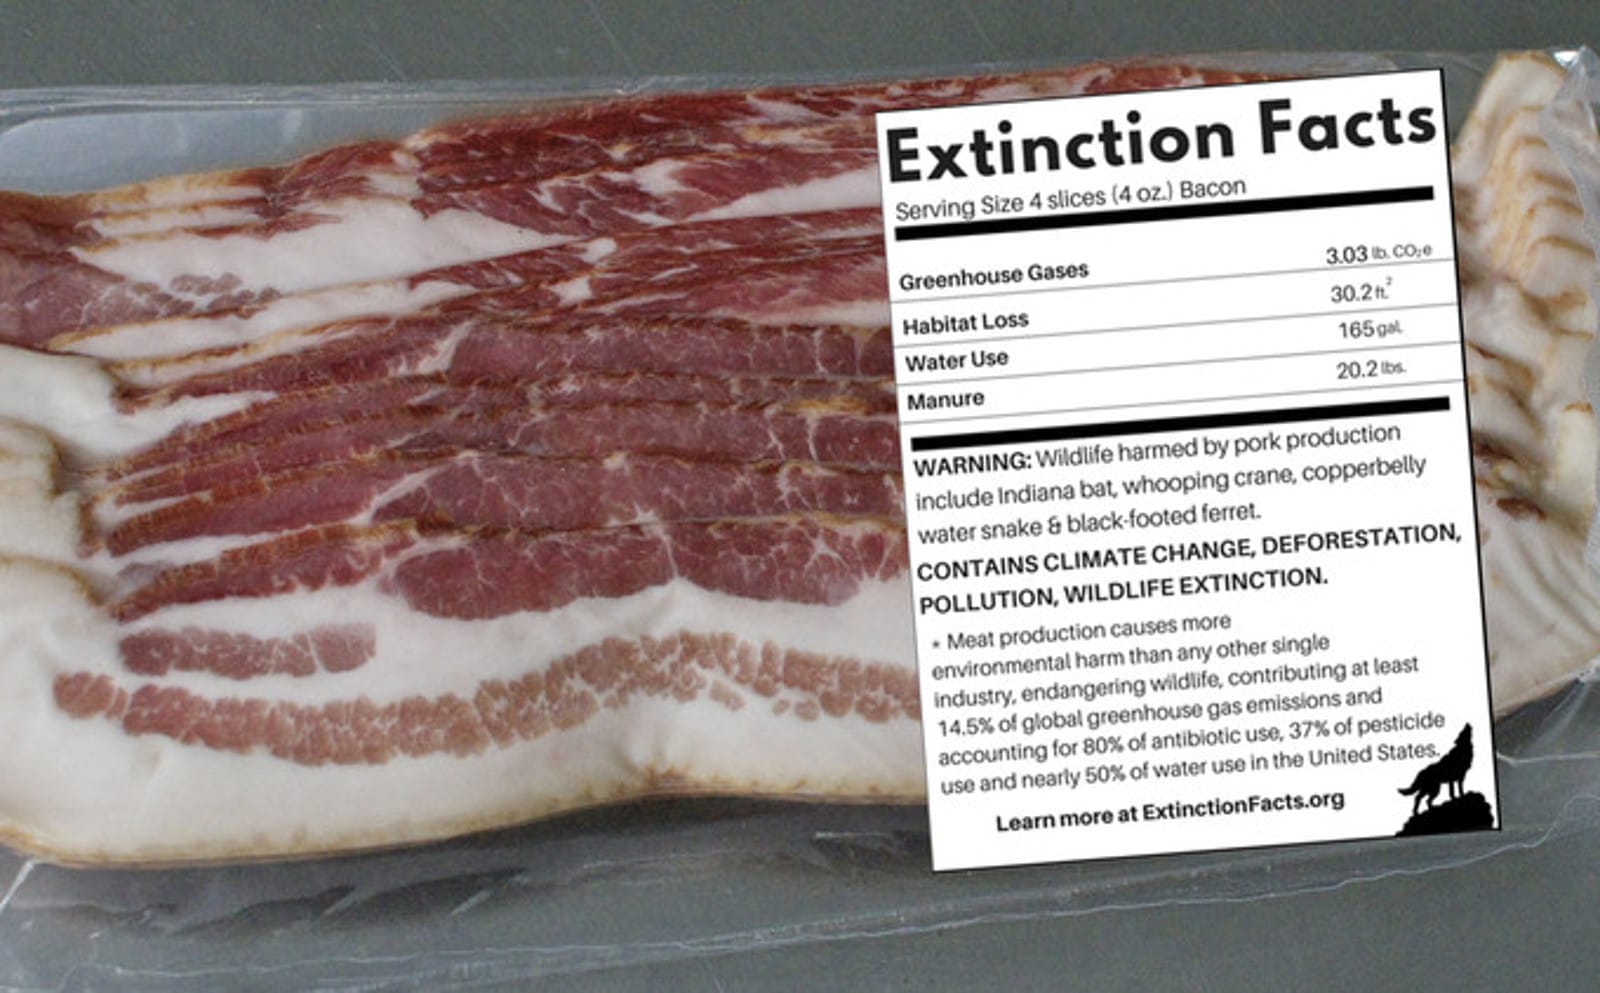 Extinction Facts Labels Expose What Our Meat Addiction Means for Wildlife